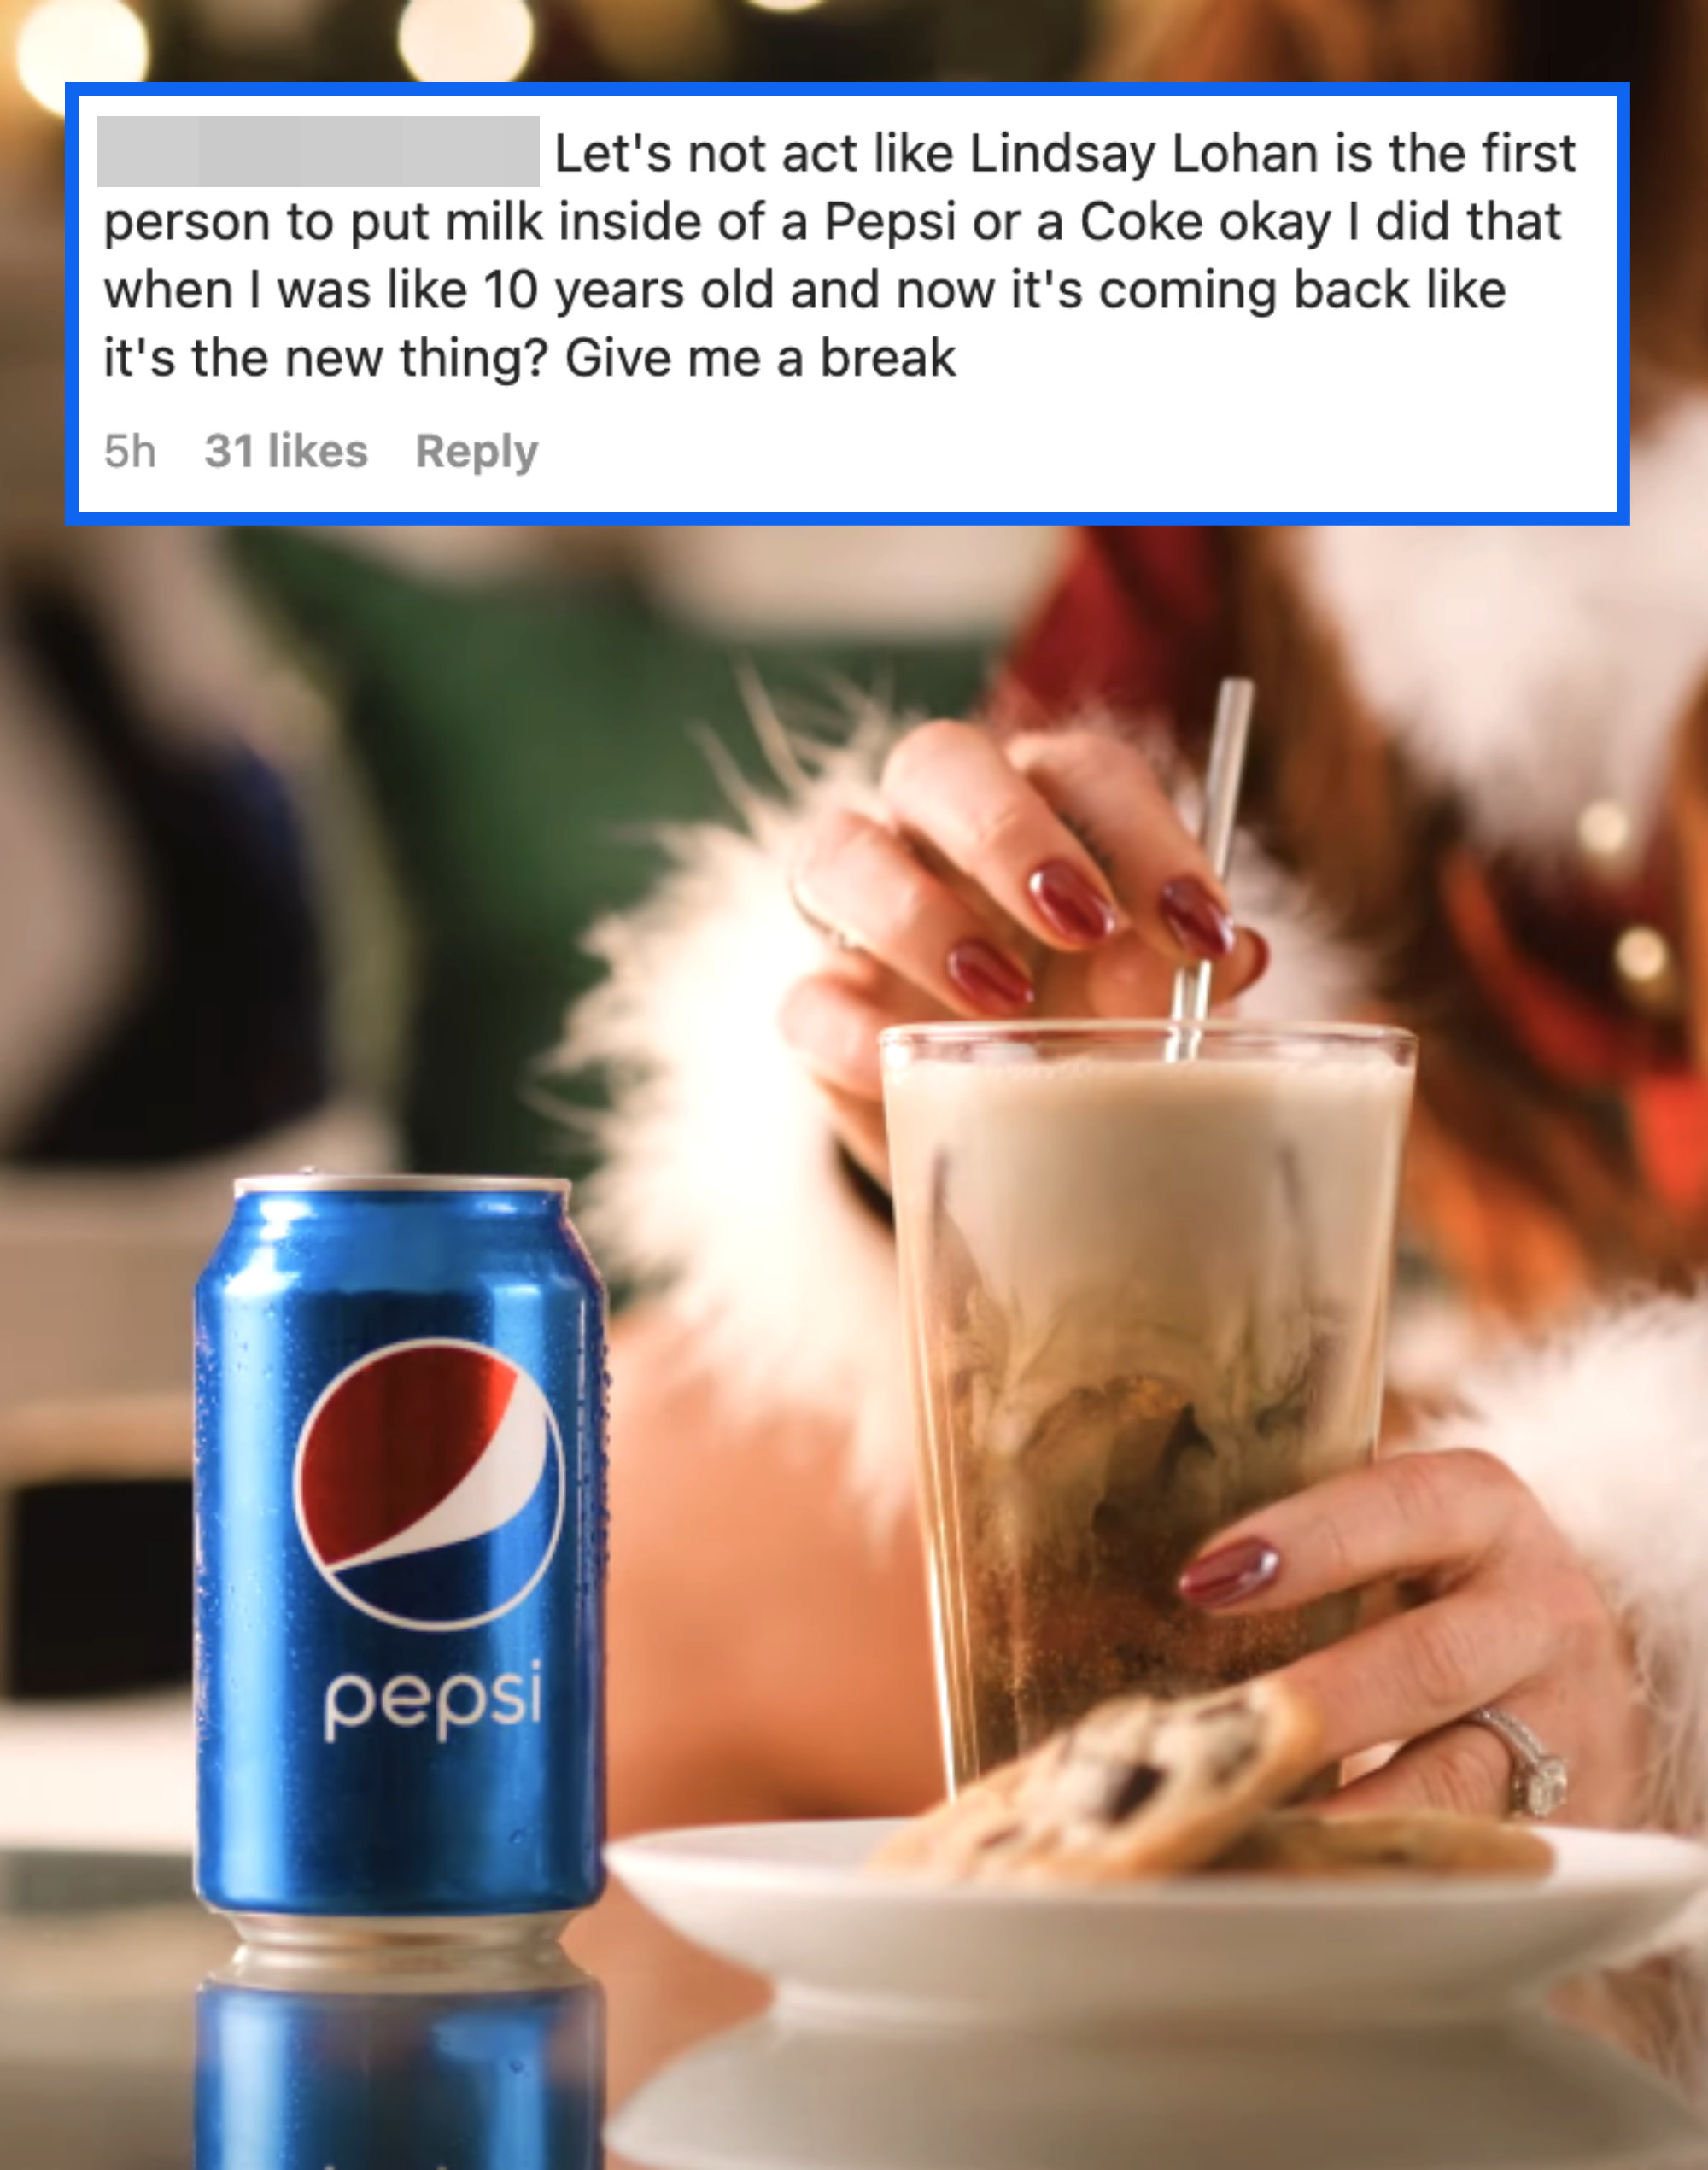 Commenter saying &quot;let&#x27;s not act like Lindsay is the first person to put milk inside a Pepsi or Coke; i did that when I was like 10&quot;